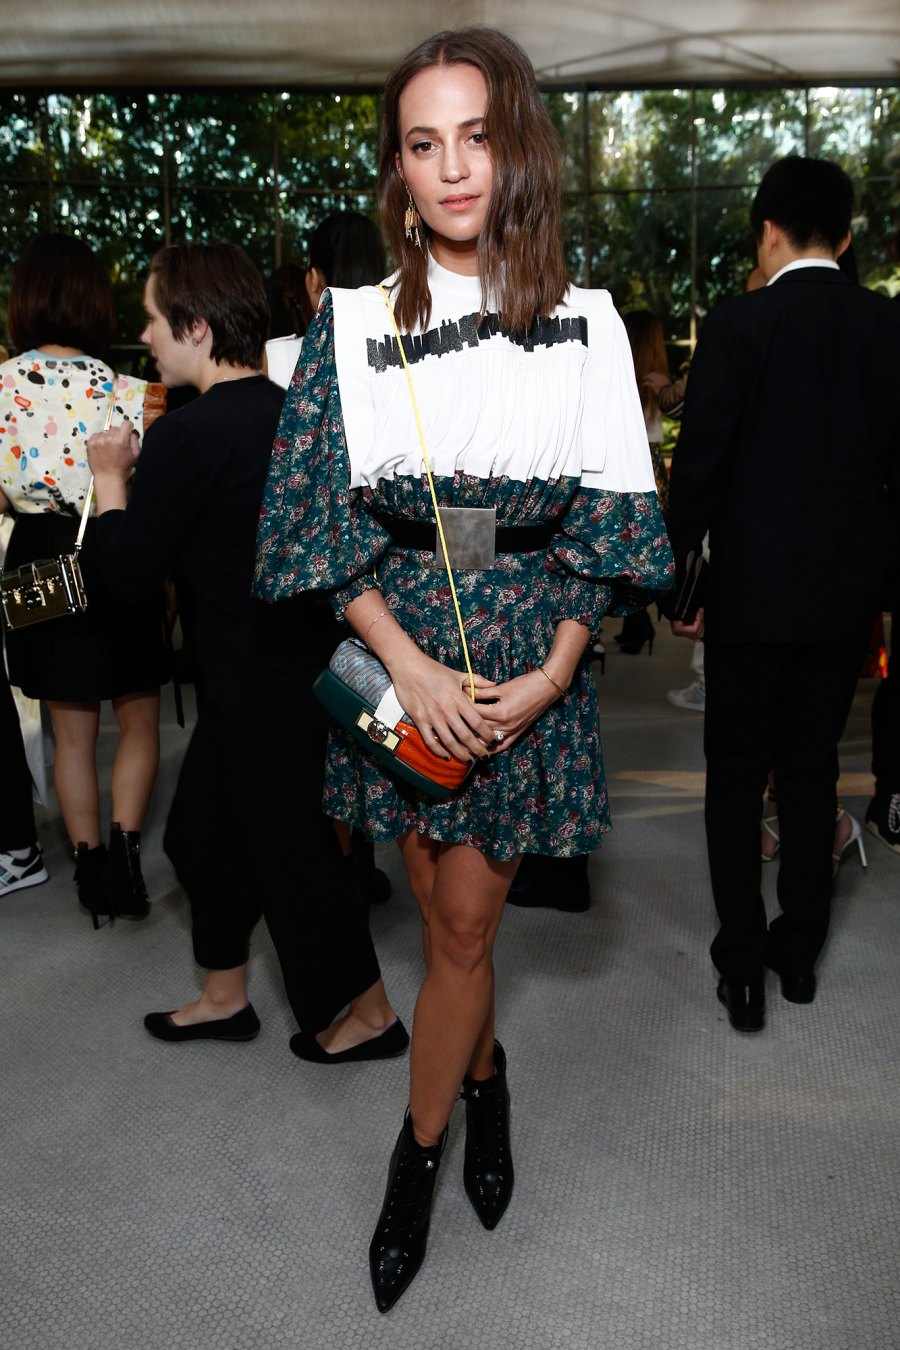 Louis Vuitton Cruise 2019: Celebrities On Front Row